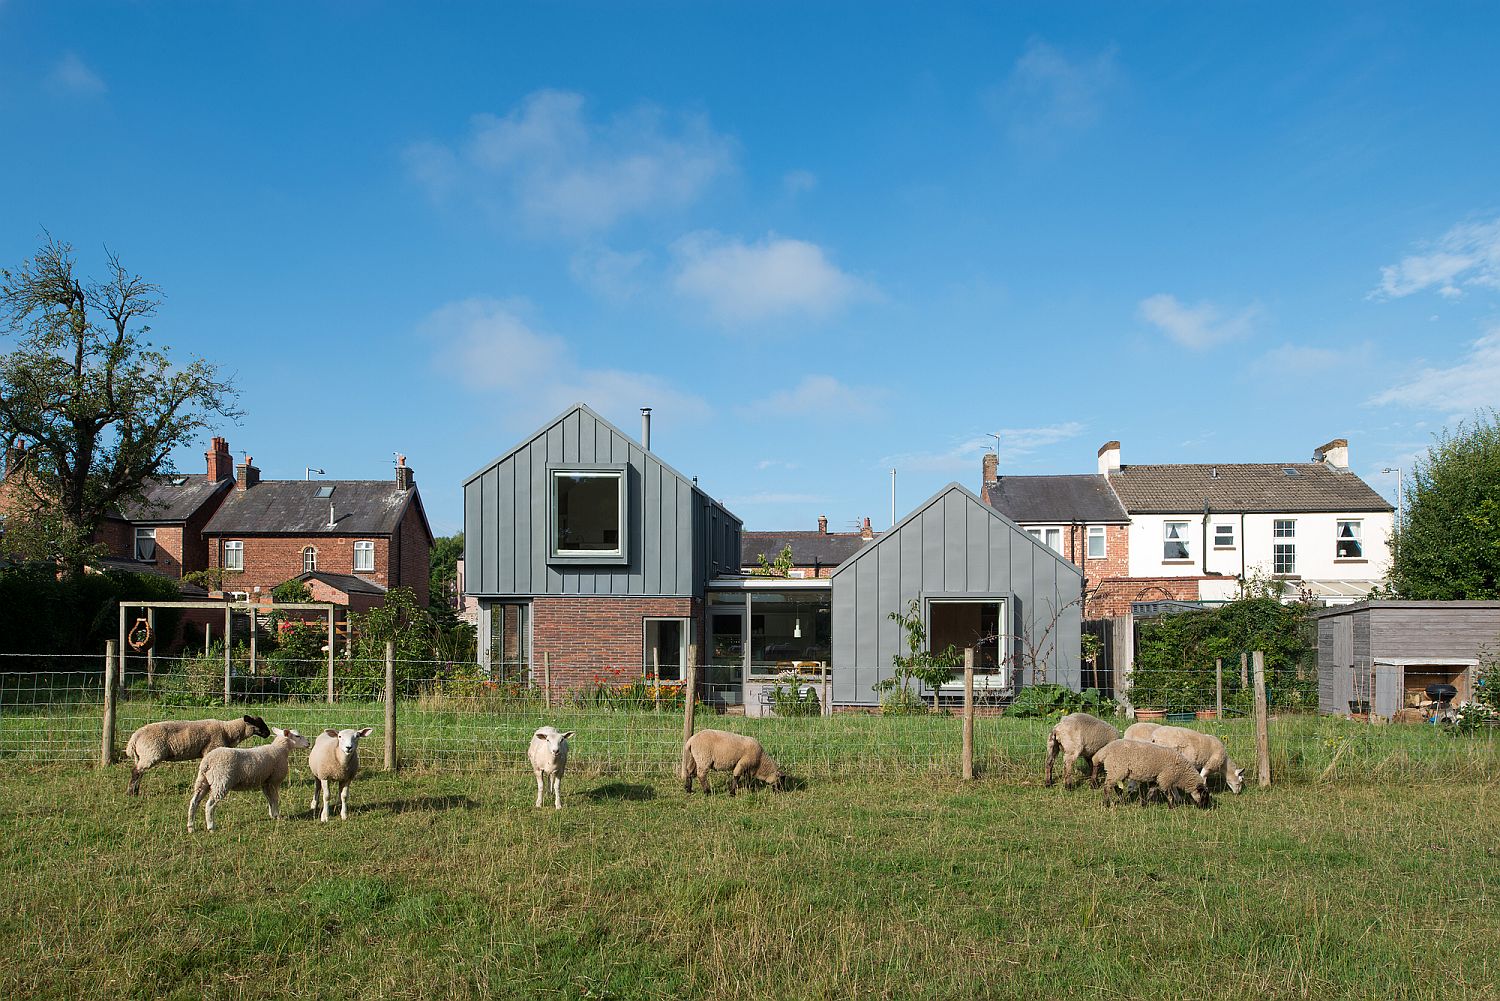 Cost-effective and innovative design of Zinc House in Lancashire